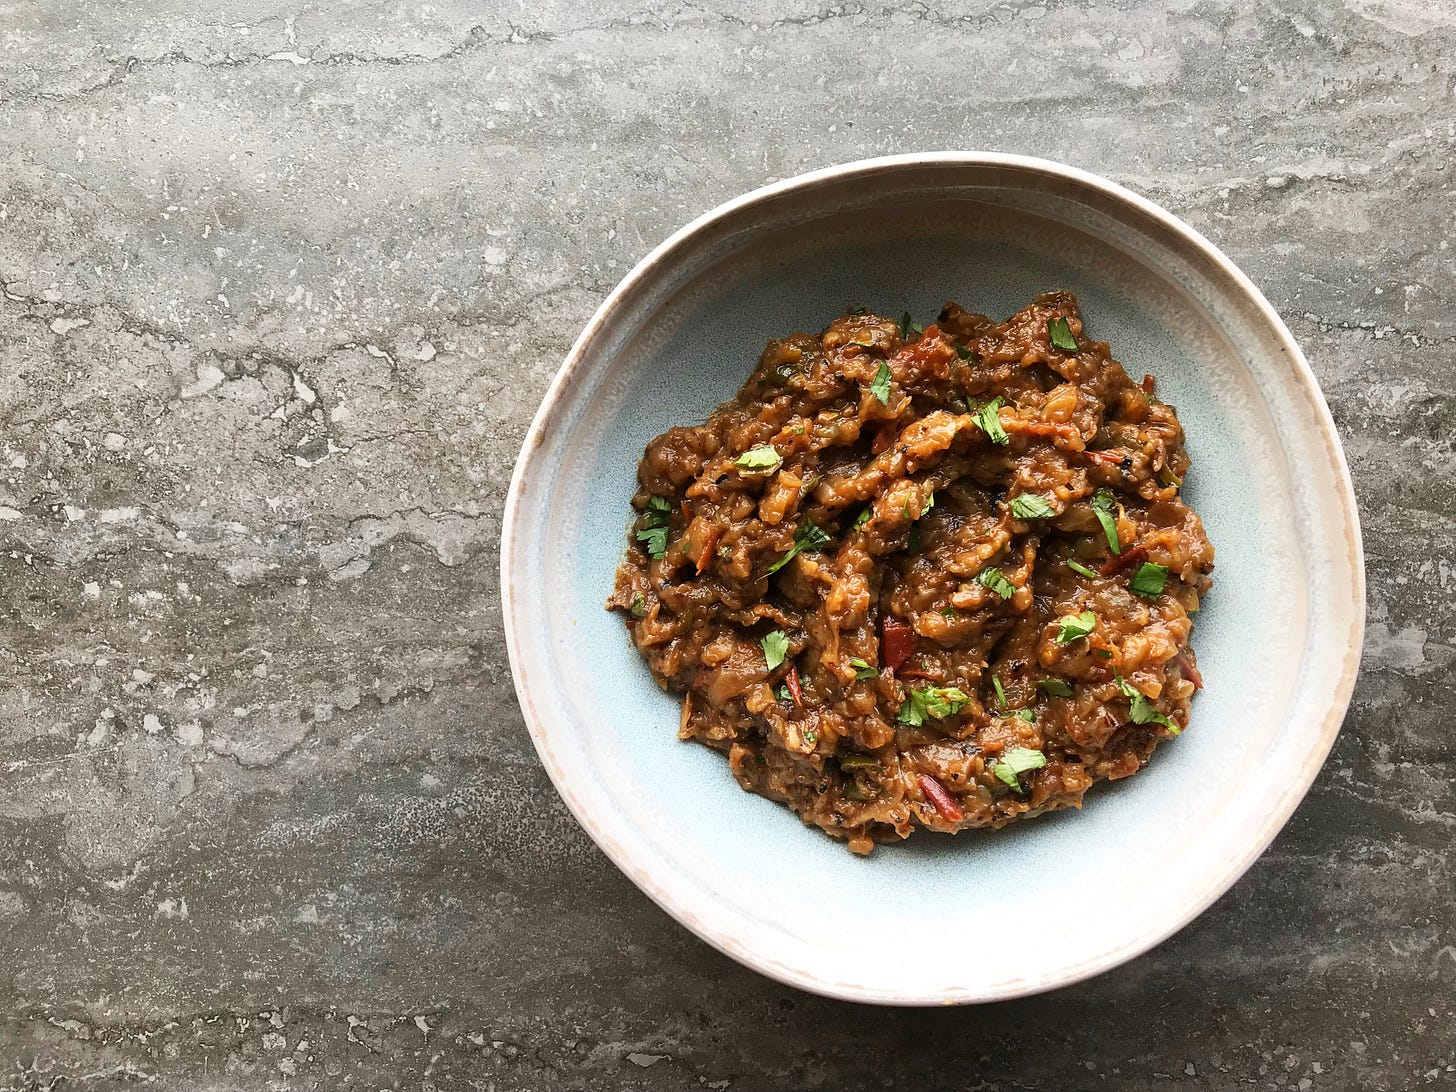 A bowl so aubergine masala: Golden waves of soft aubergine mixed with red tomato and flecked with green coriander leaf.